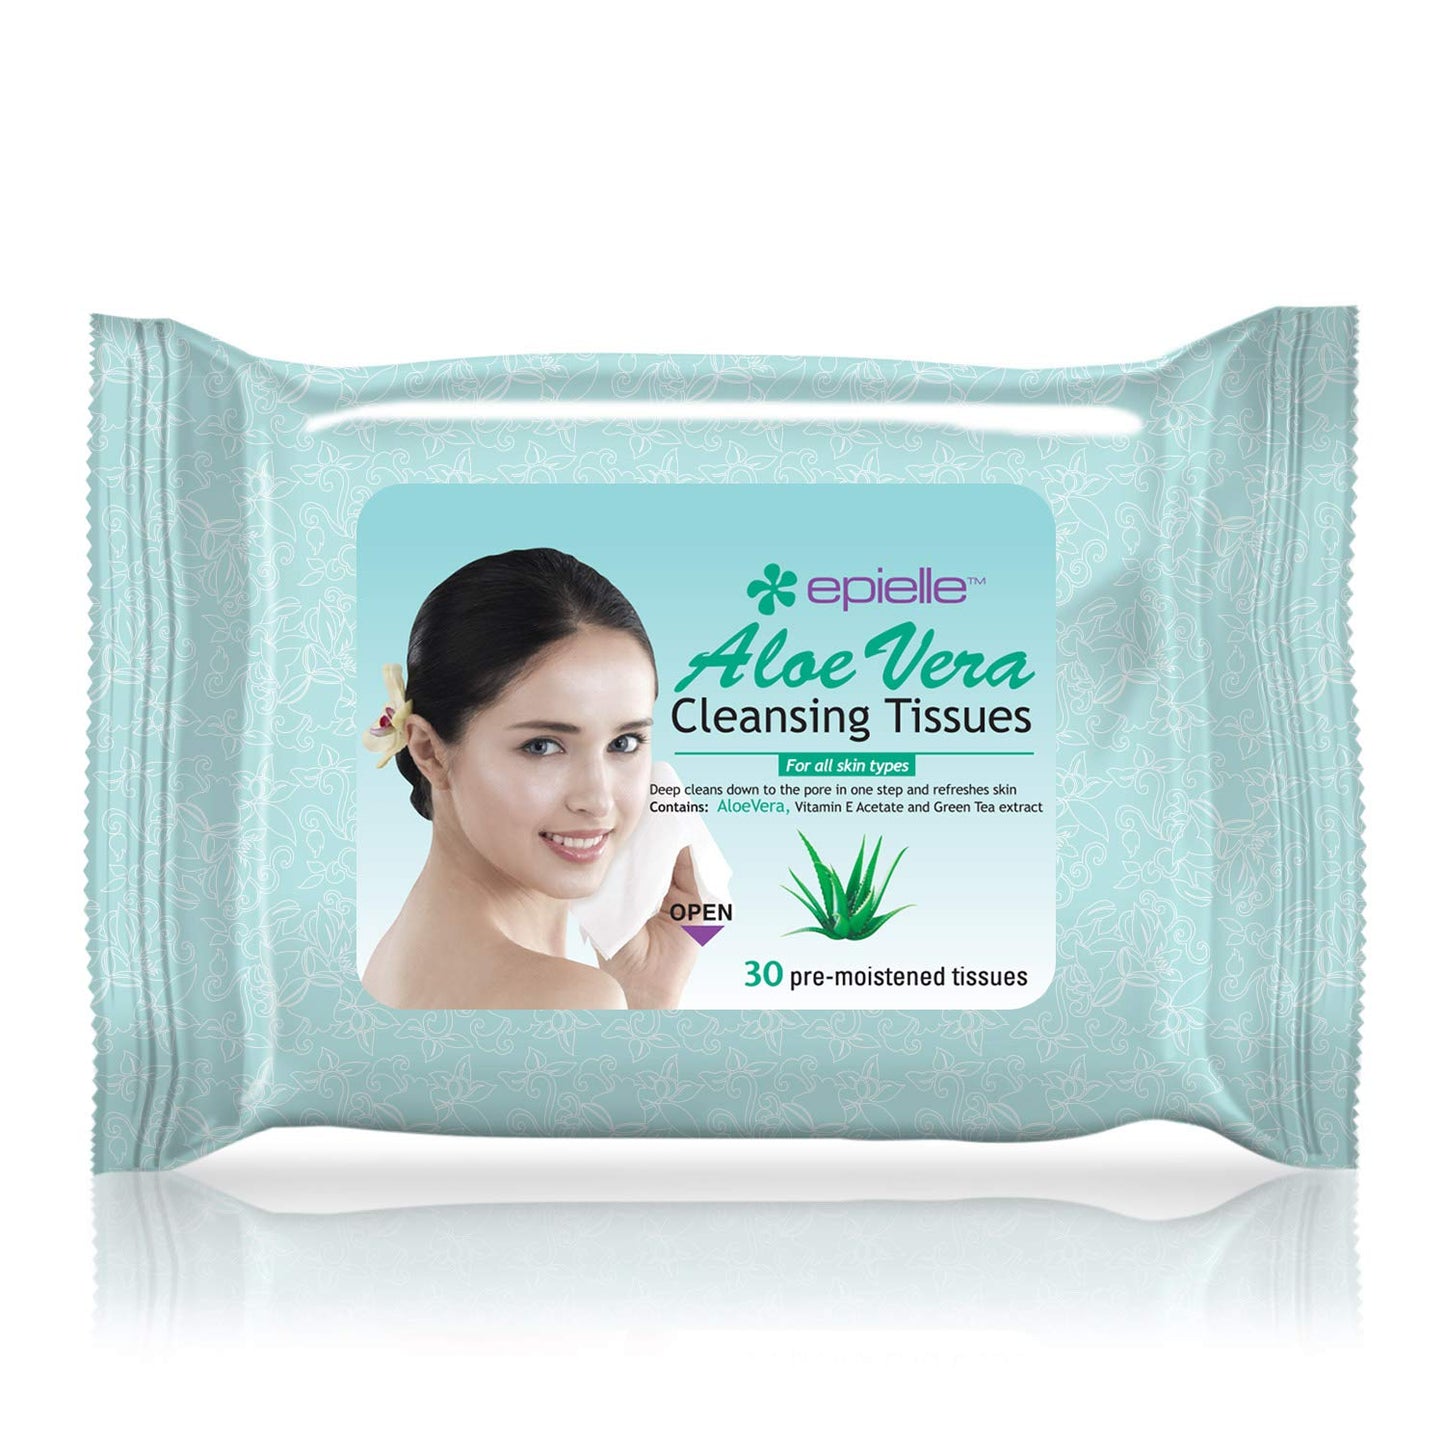 Aloe Vera Facial Cleansing Towelettes | Travel-Friendly Face Wipes